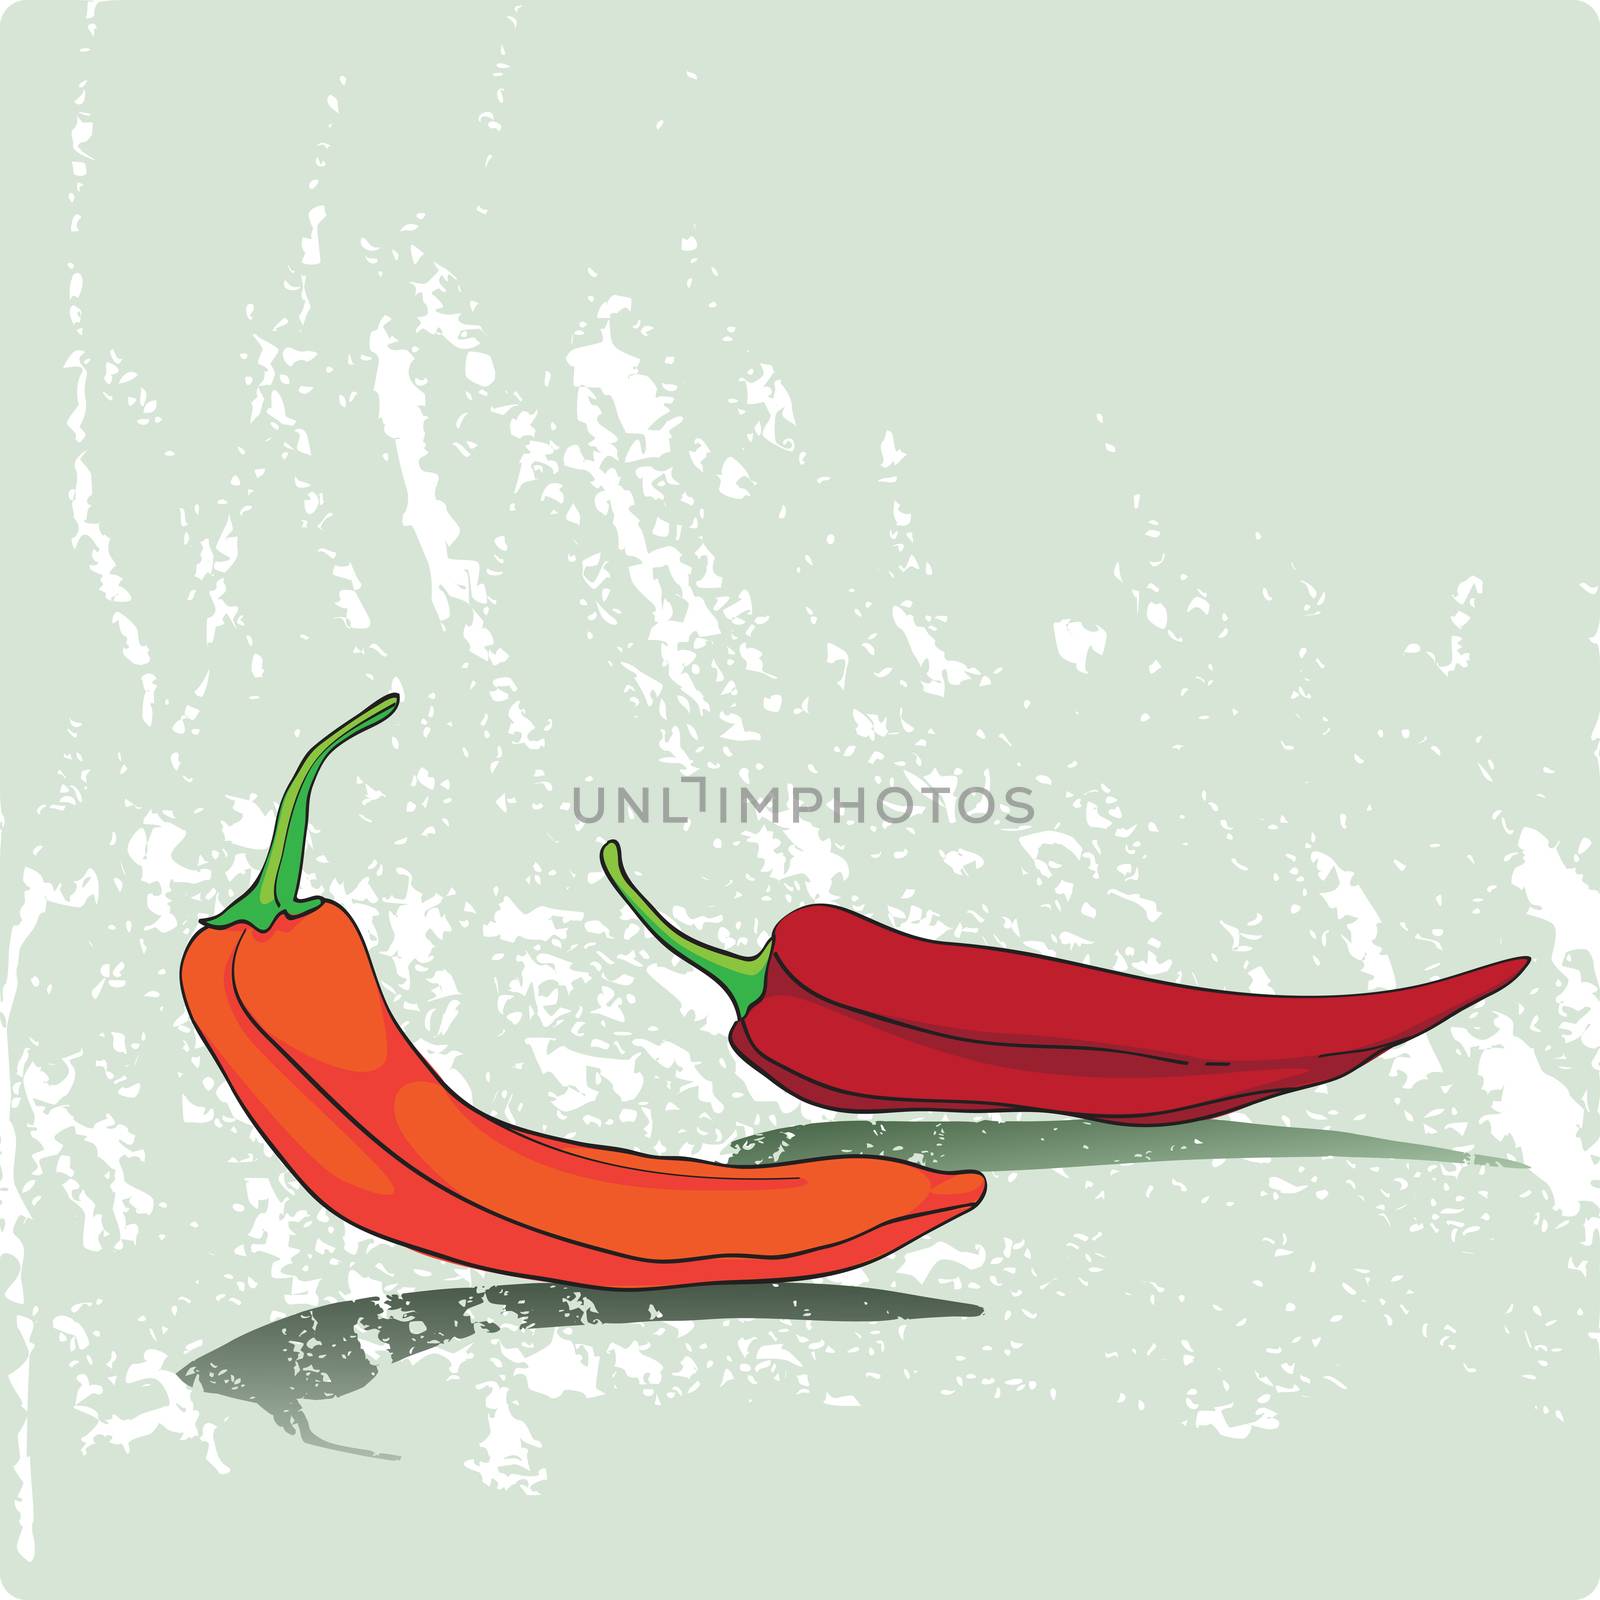 Hand drawn cartoon illustration representing two peppers on a grungy faded green background